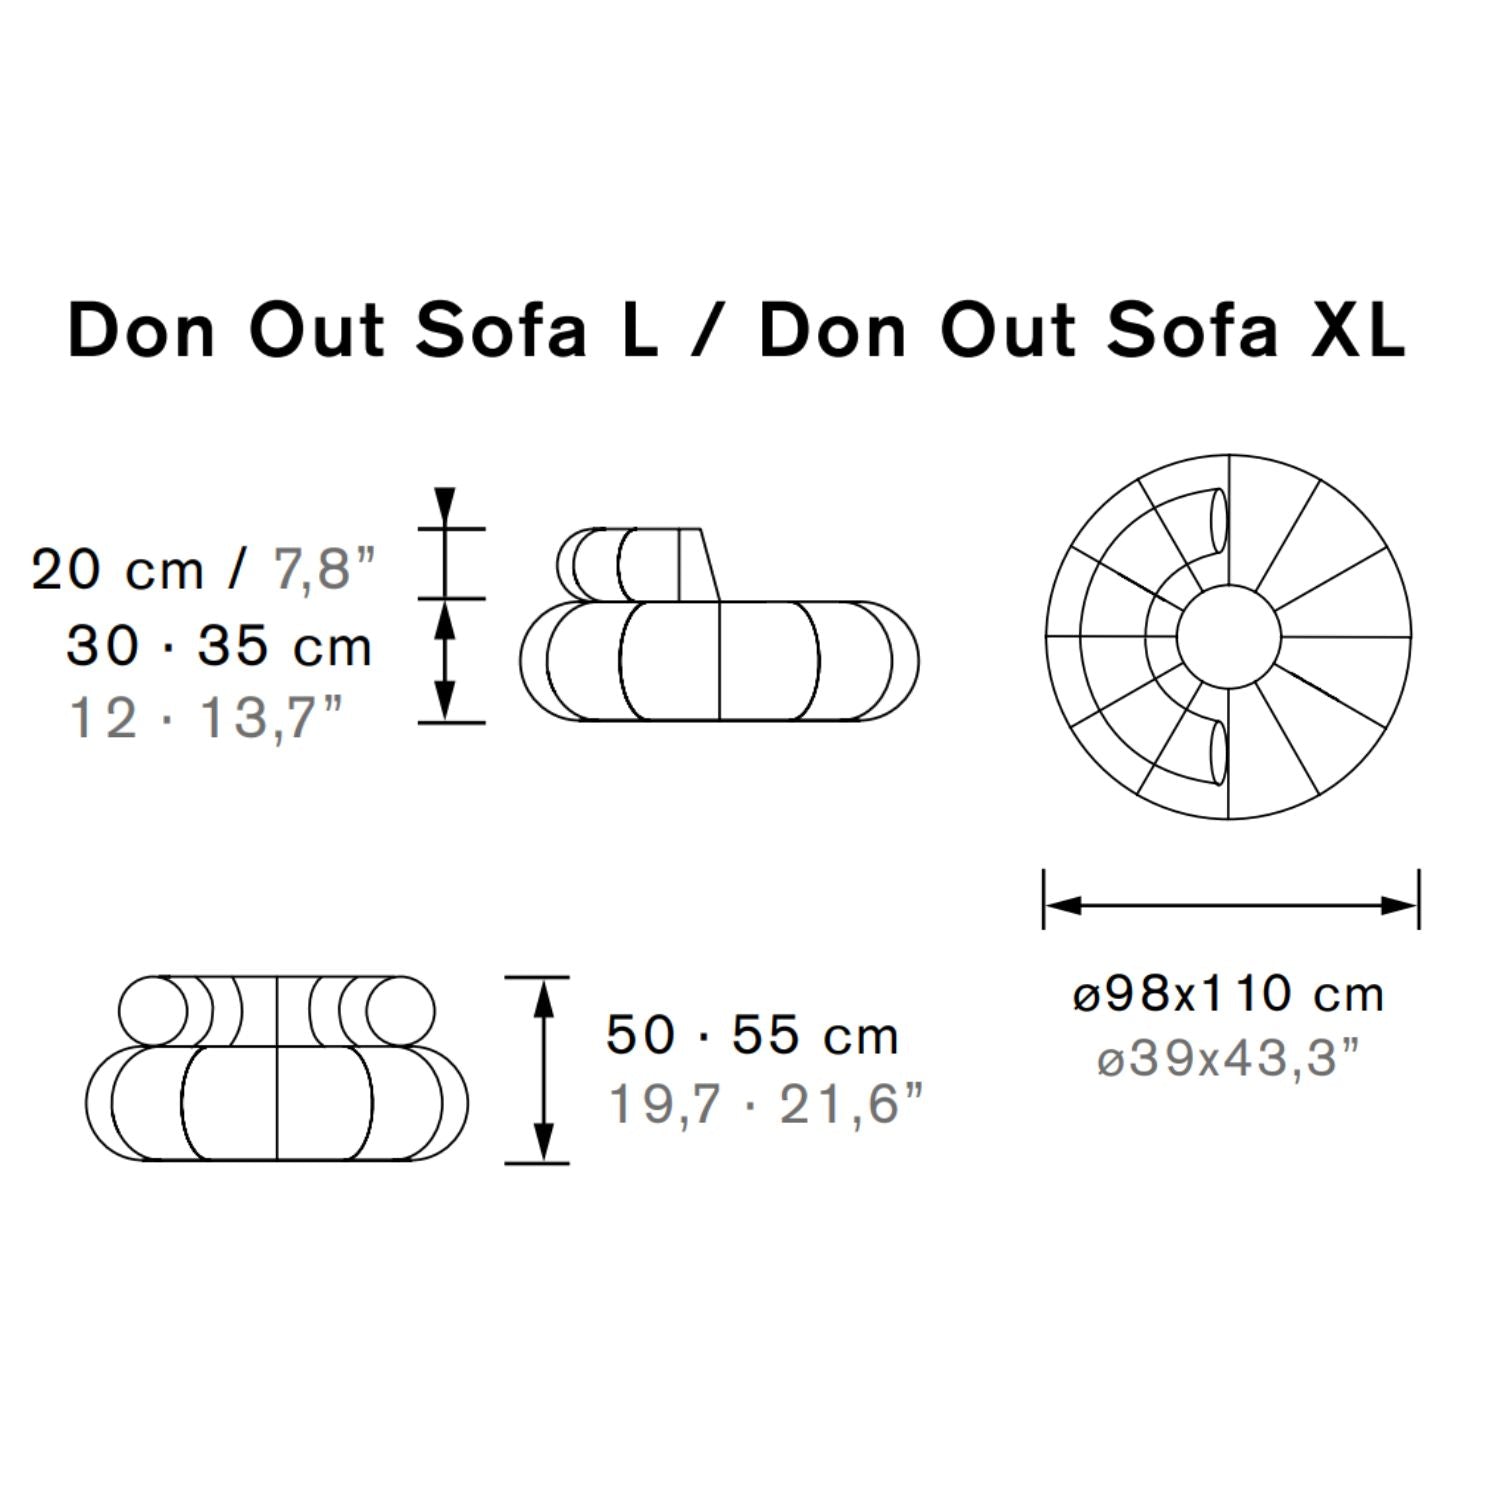 DON OUT SOFA L